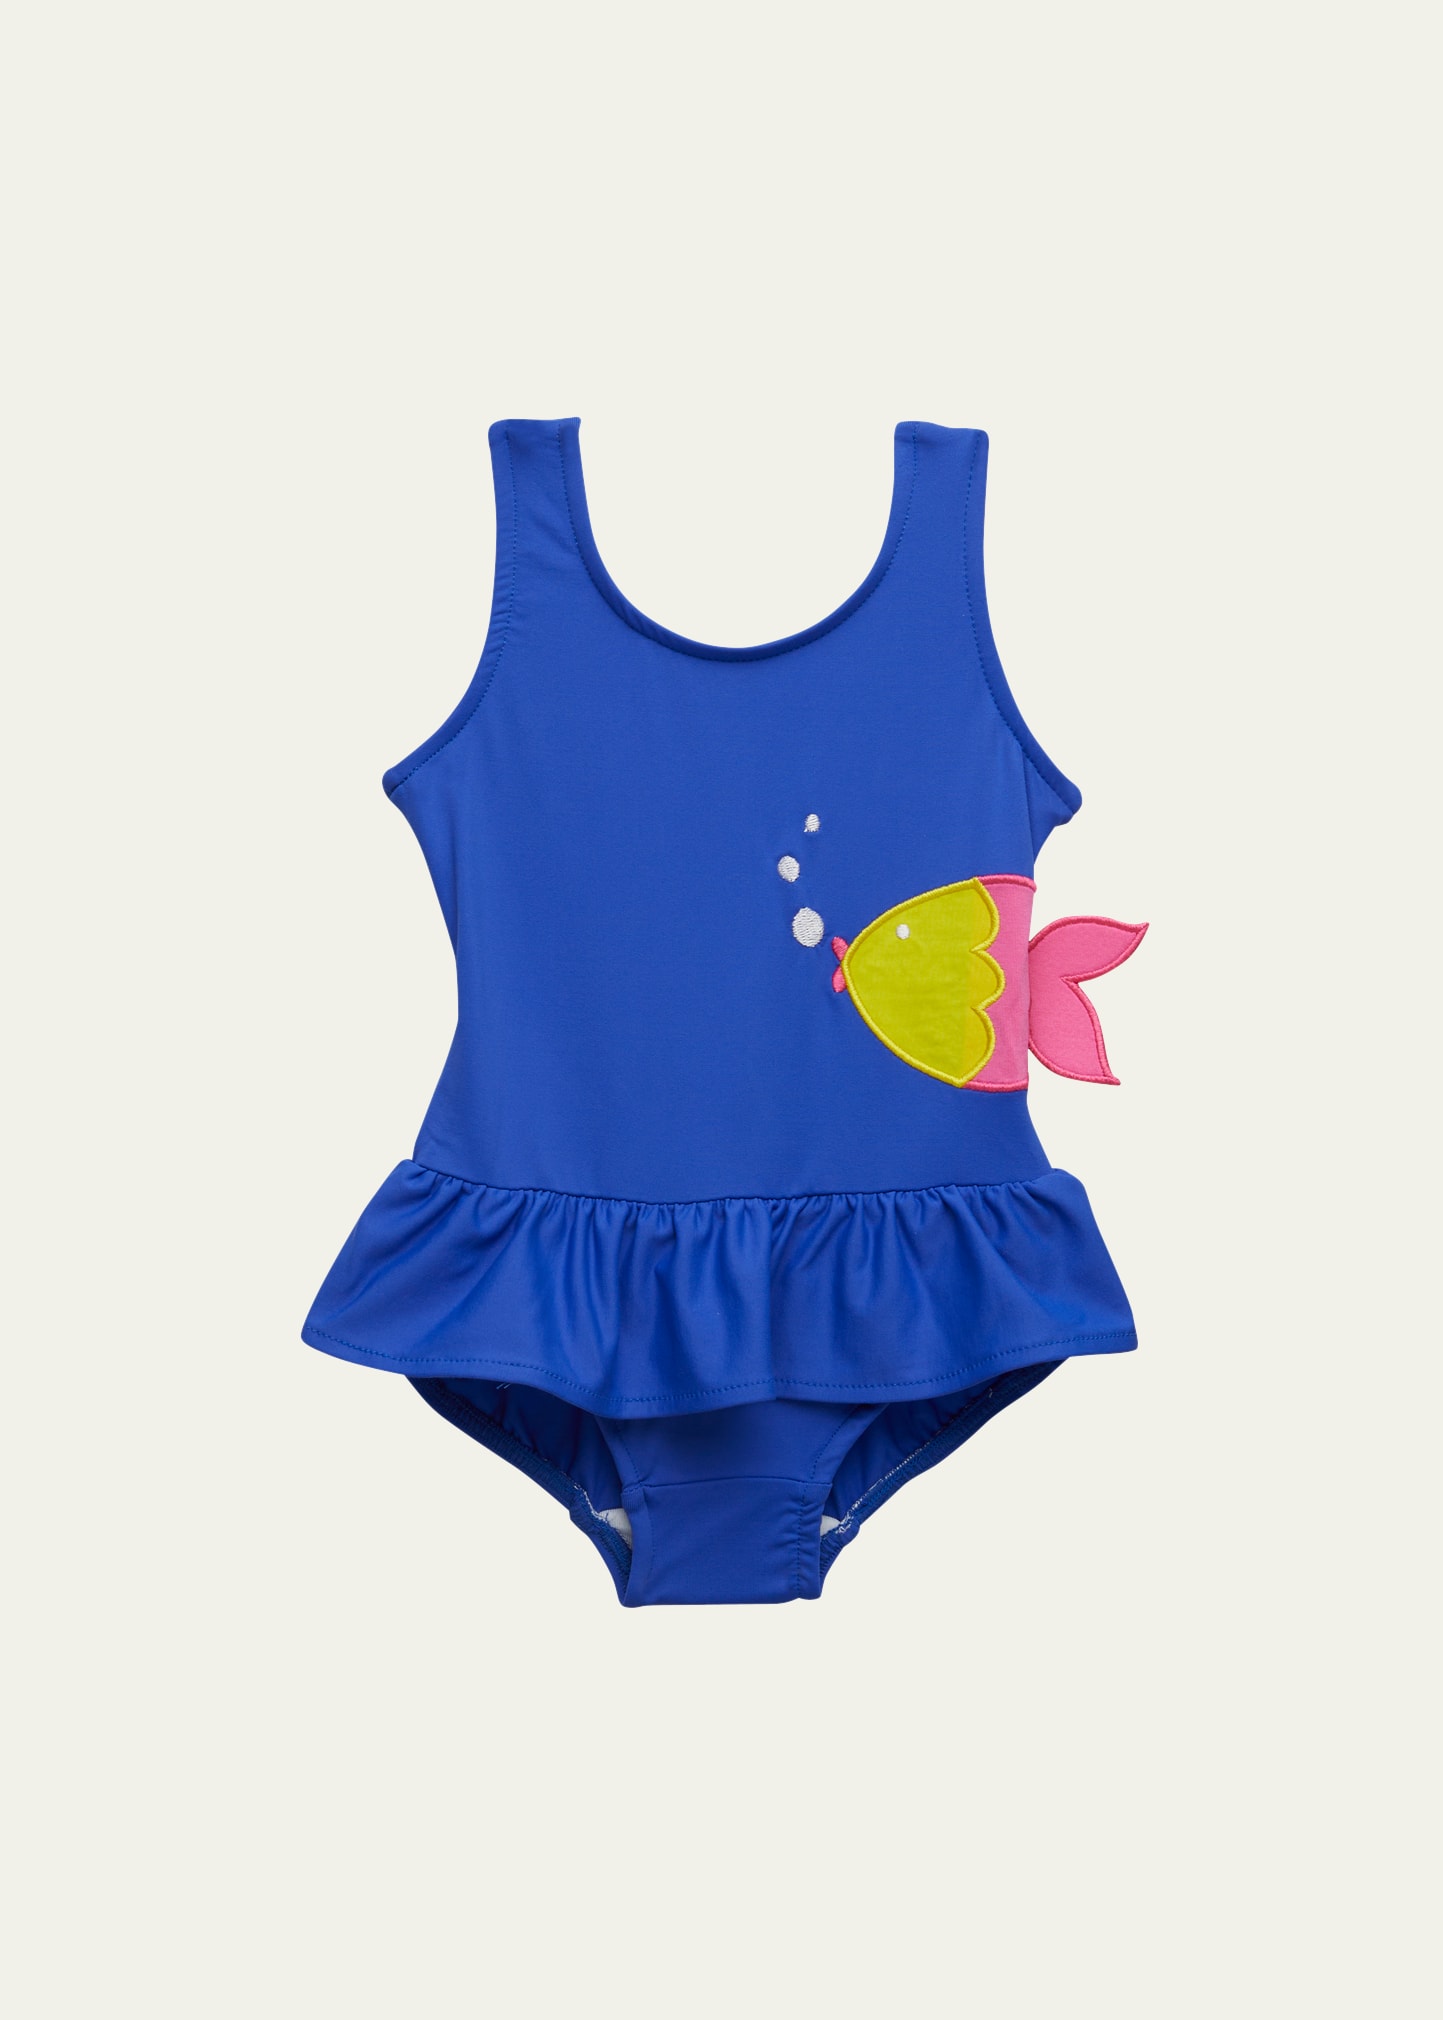 Florence Eiseman Kids' Girl's Swimsuit W/ Fish Applique In Royal